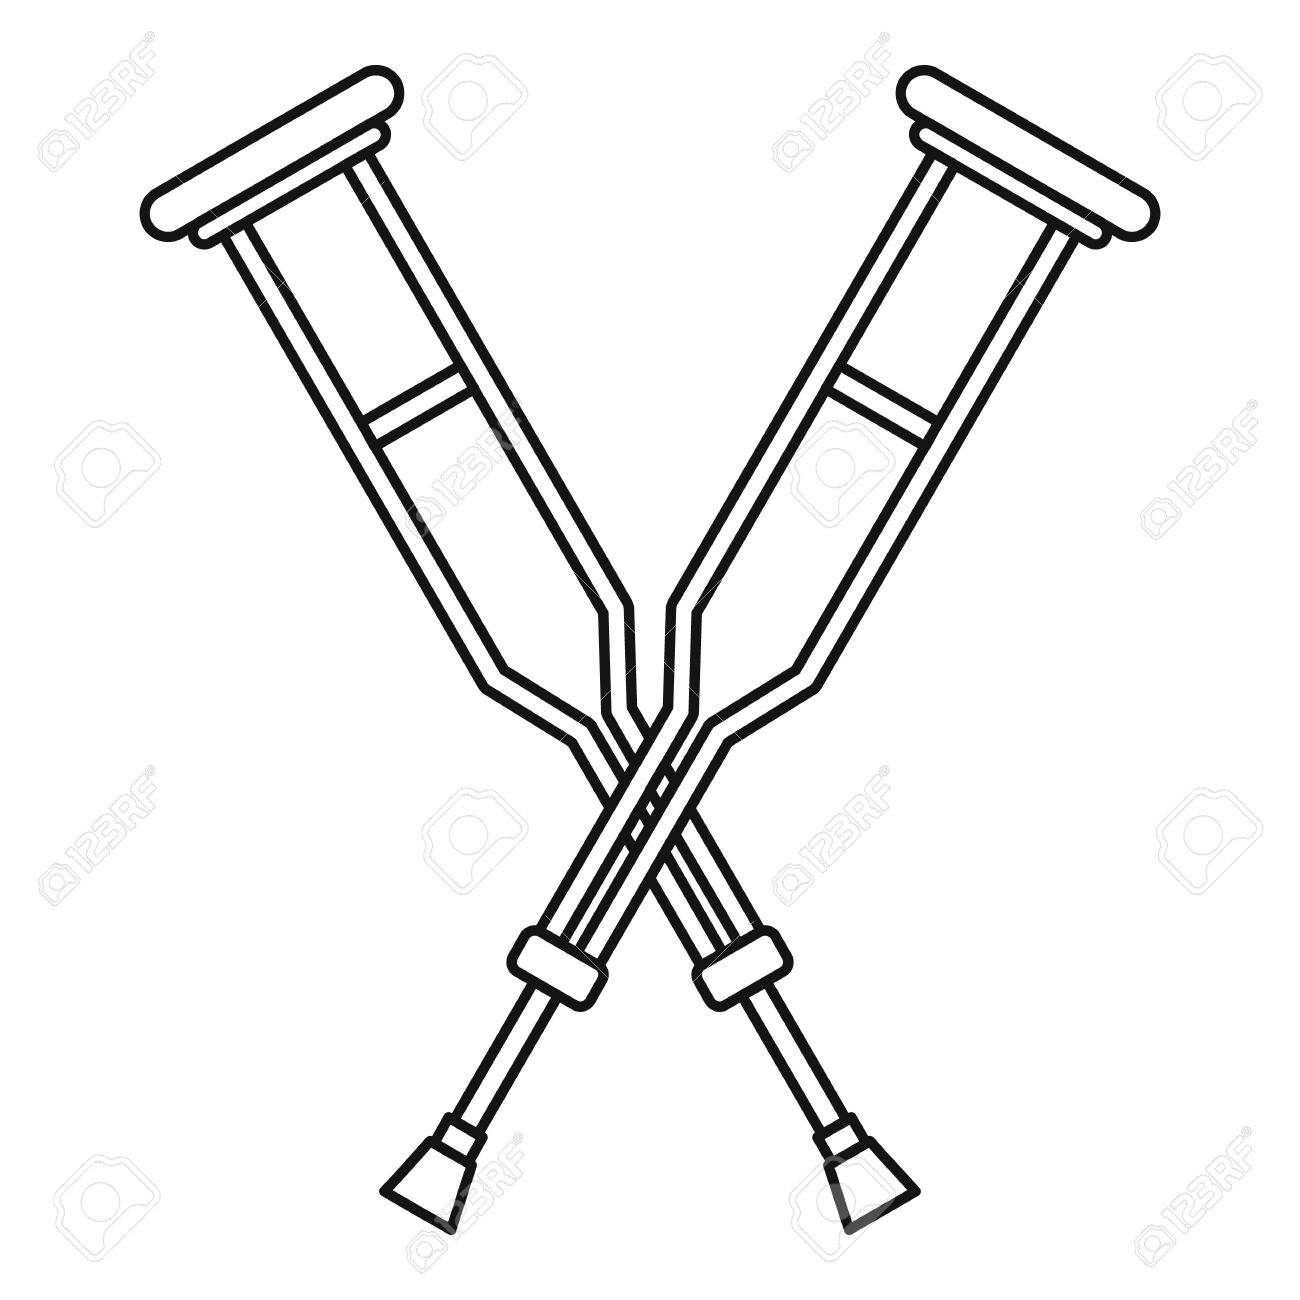 Crutches icon, outline style » Clipart Station.